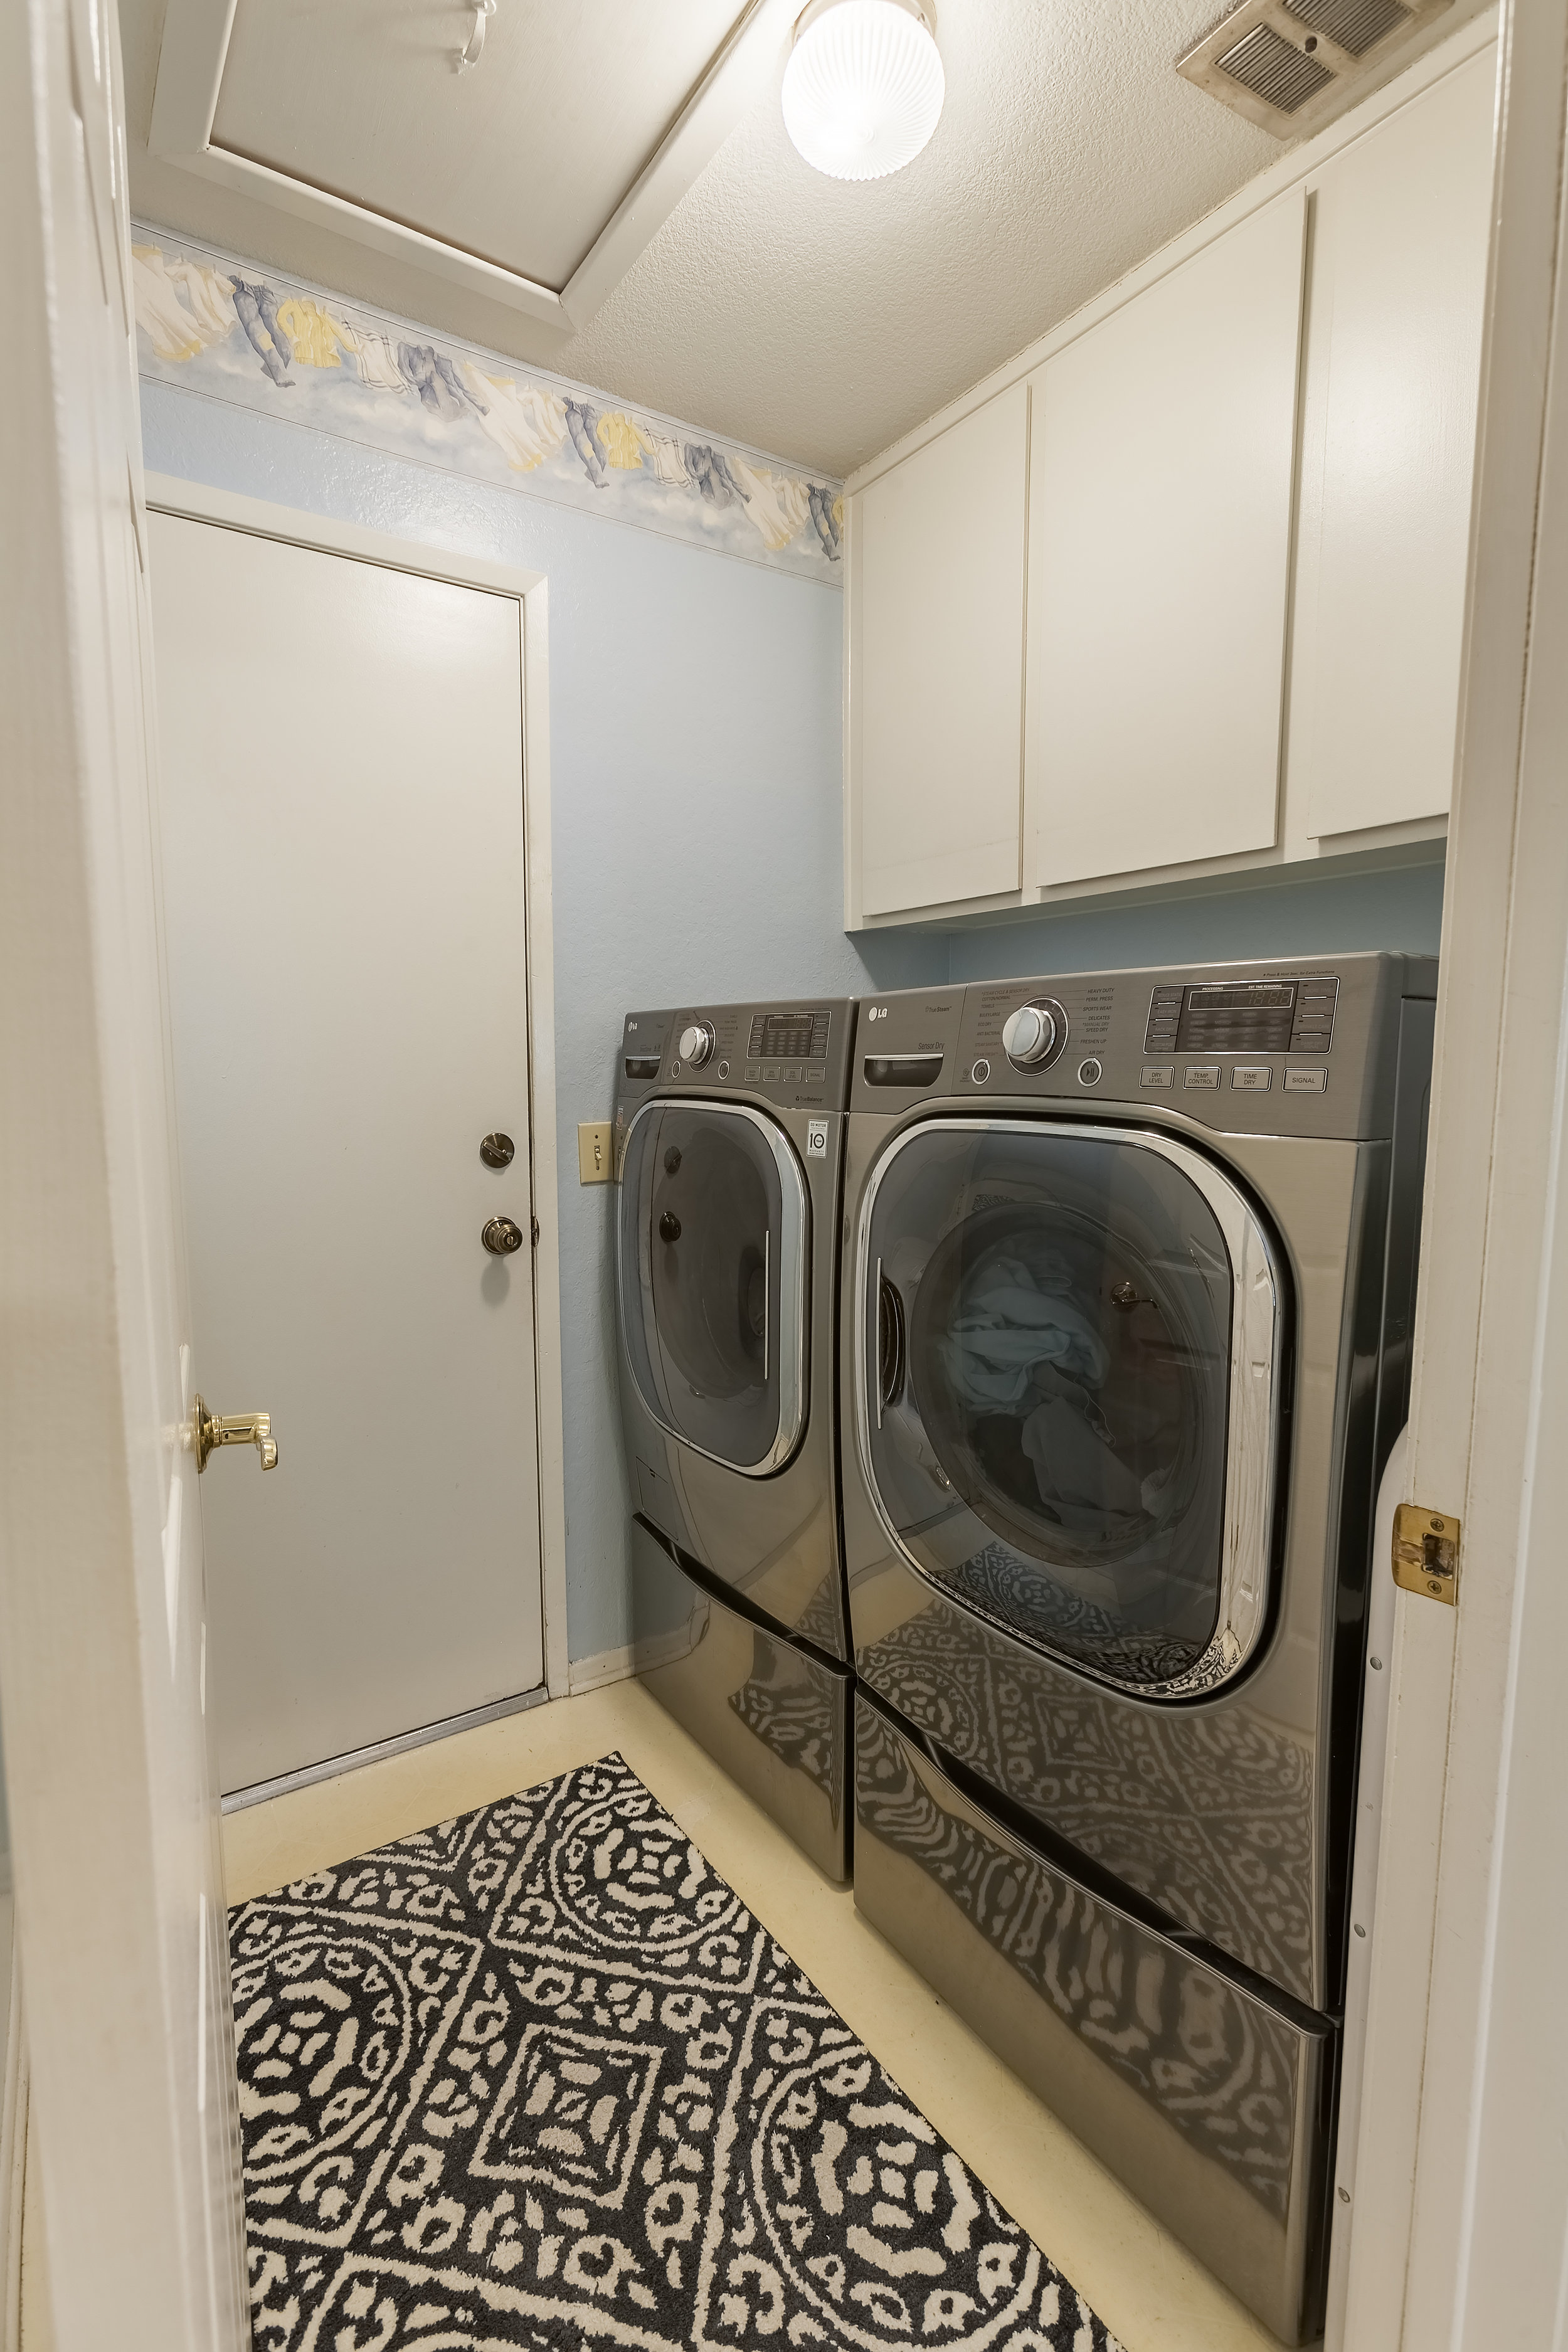 17911_Chaparral_Way-Laundry.jpg